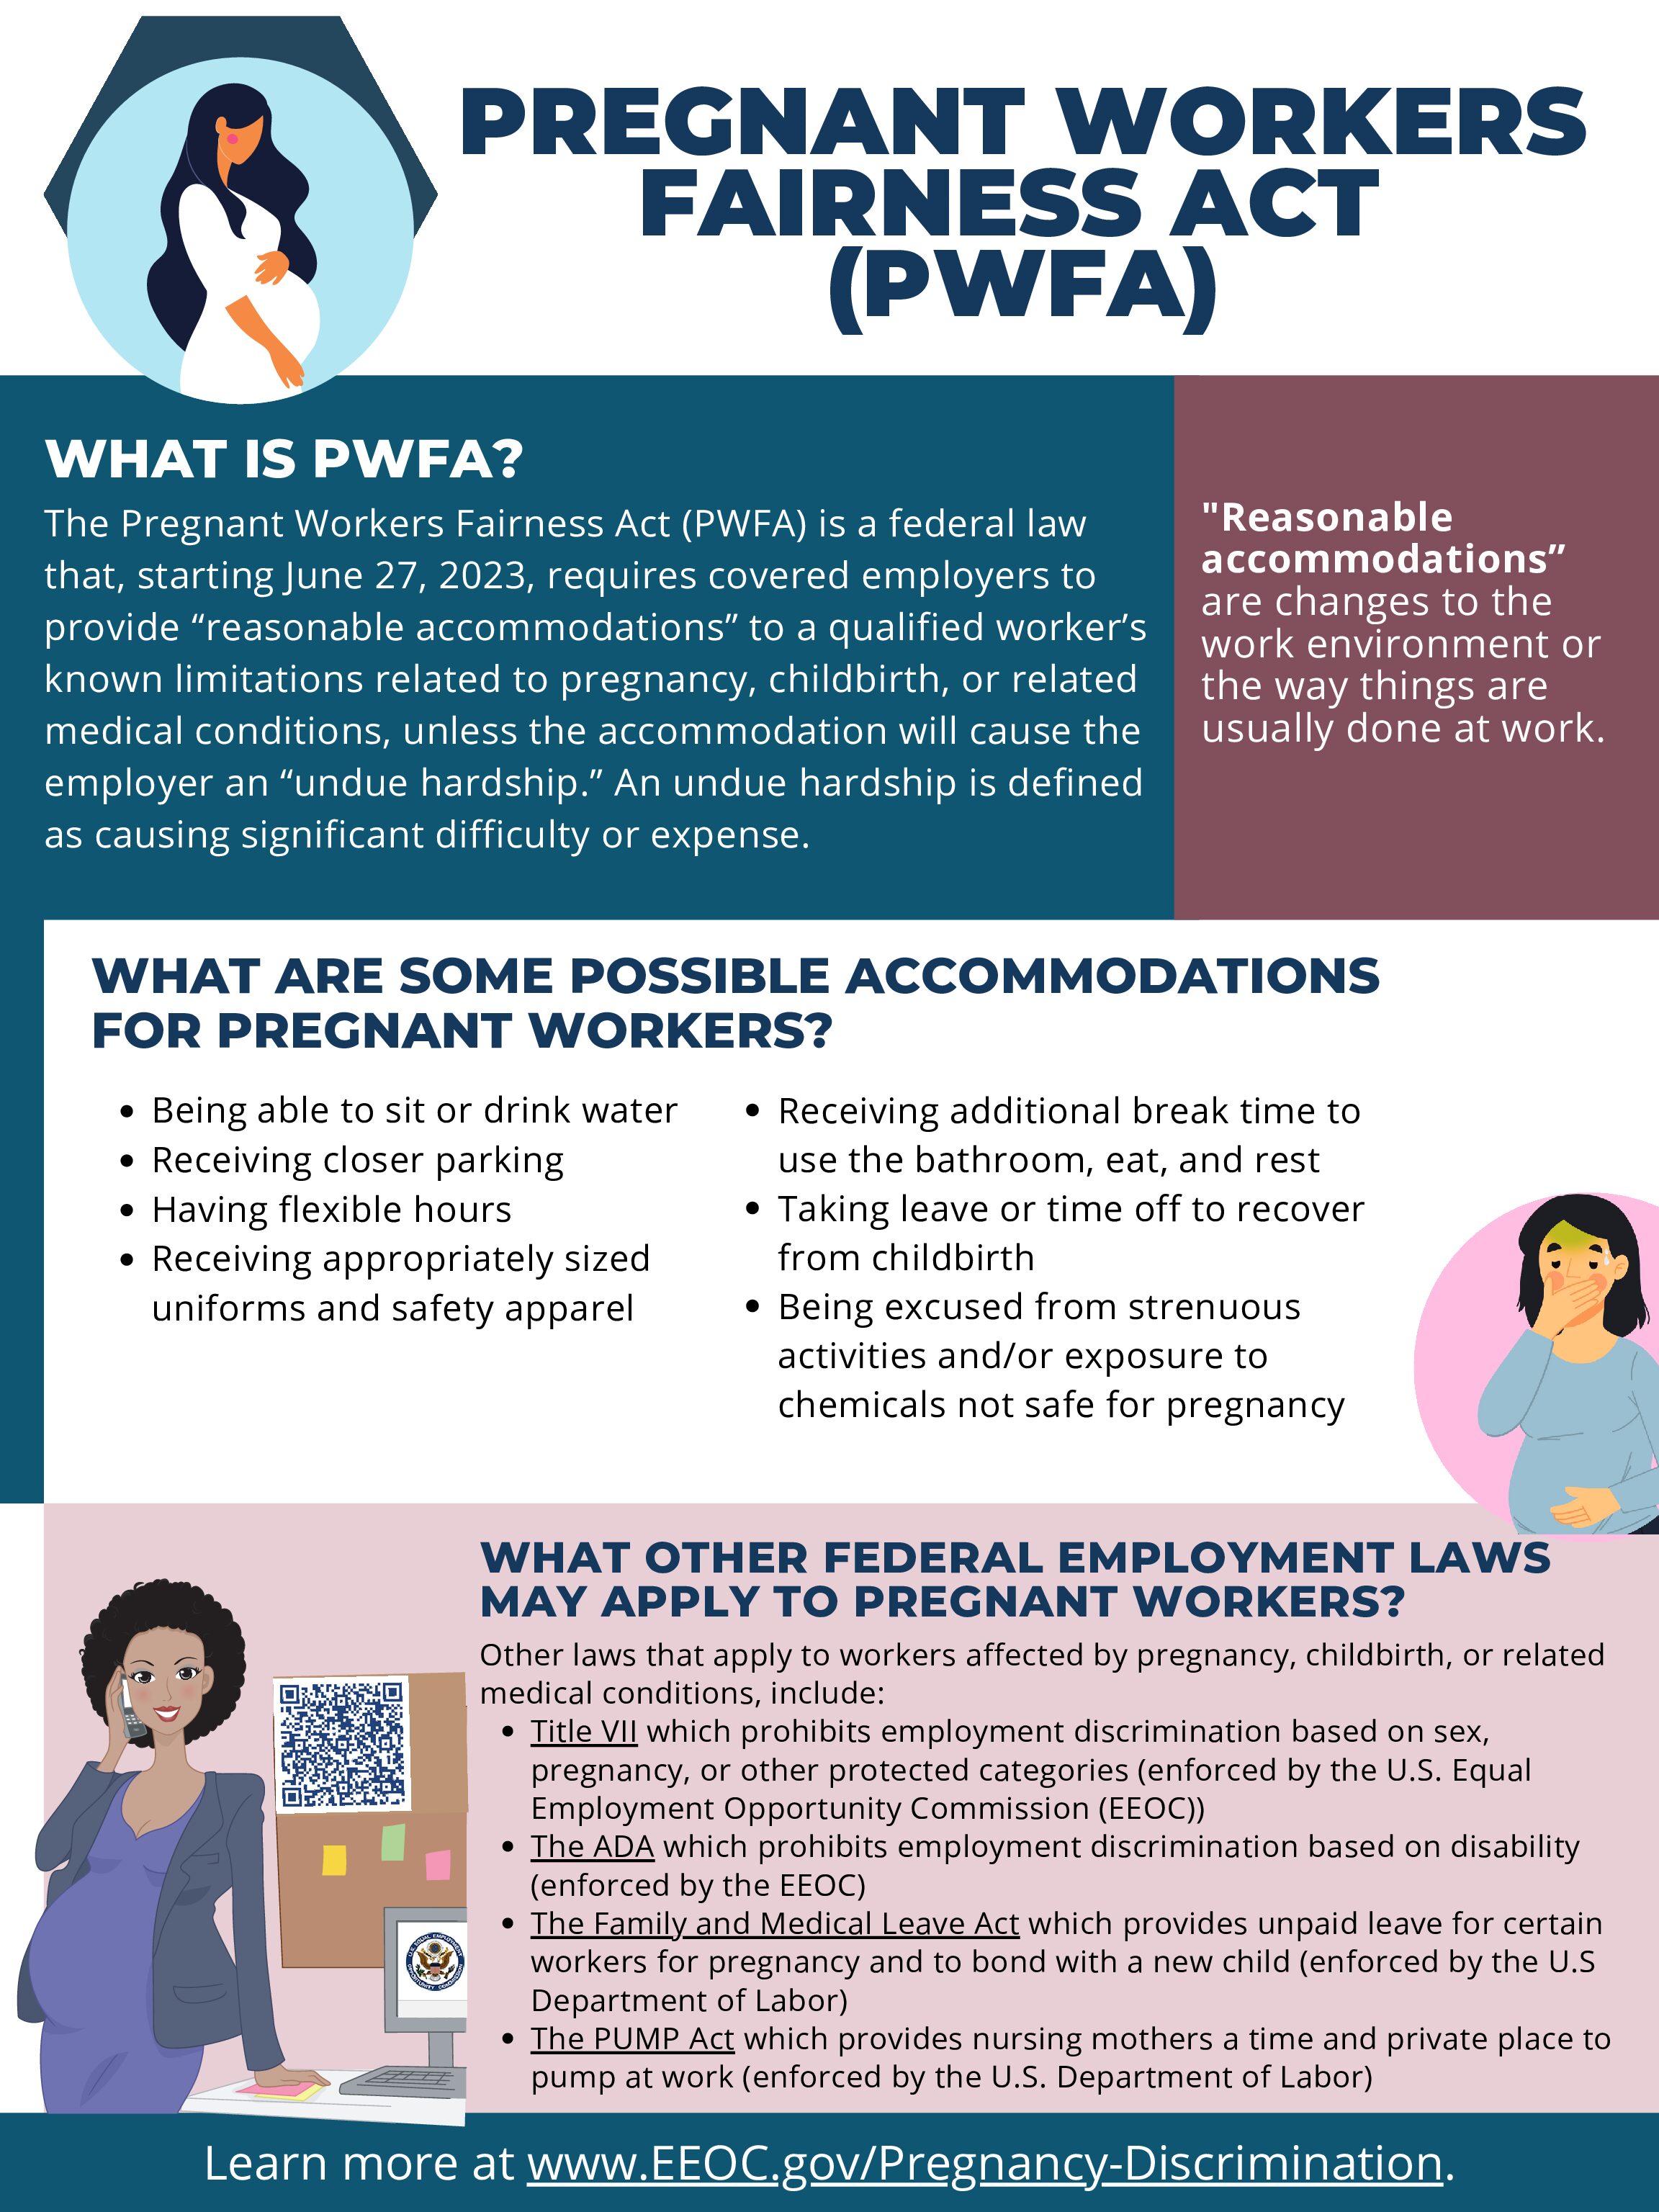 4 Things important for Agricultural Workers regarding the Federal Minimum Wage are previewed in this poster: Minimum Wage, Child Labor, Enforcement and Additional Information.